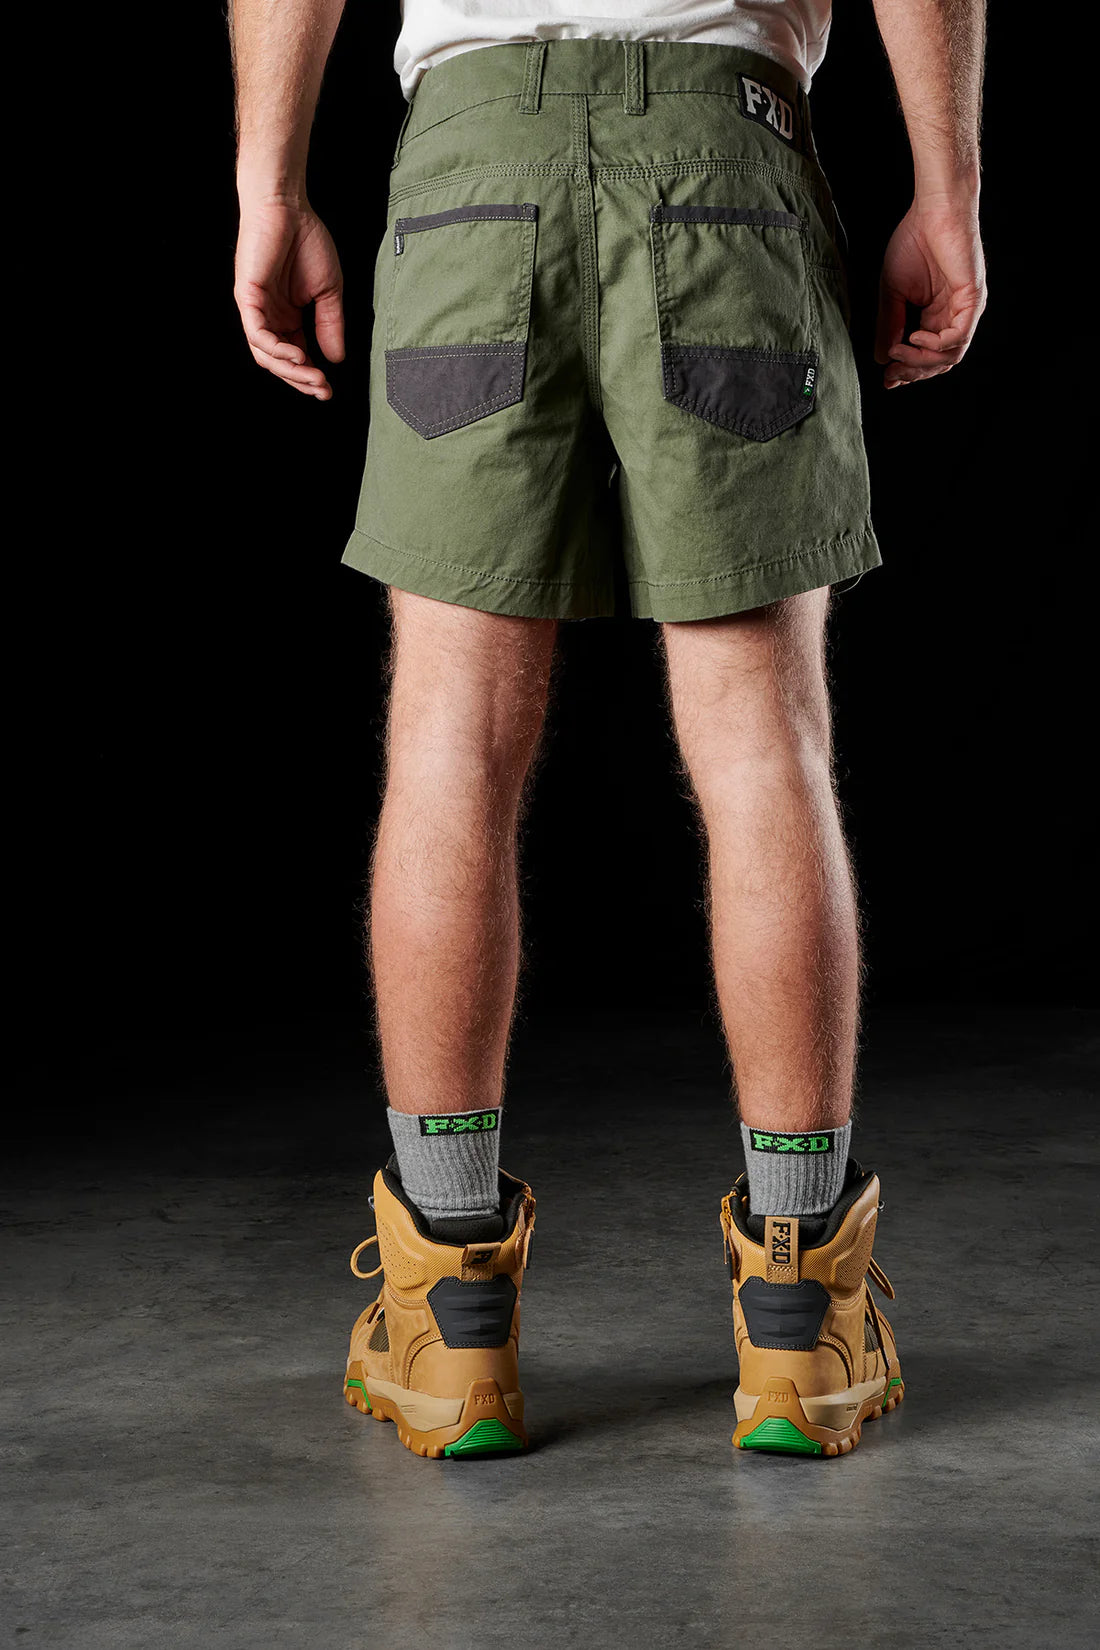 Cotton Twill Short Work Shorts - made by FXD Workwear